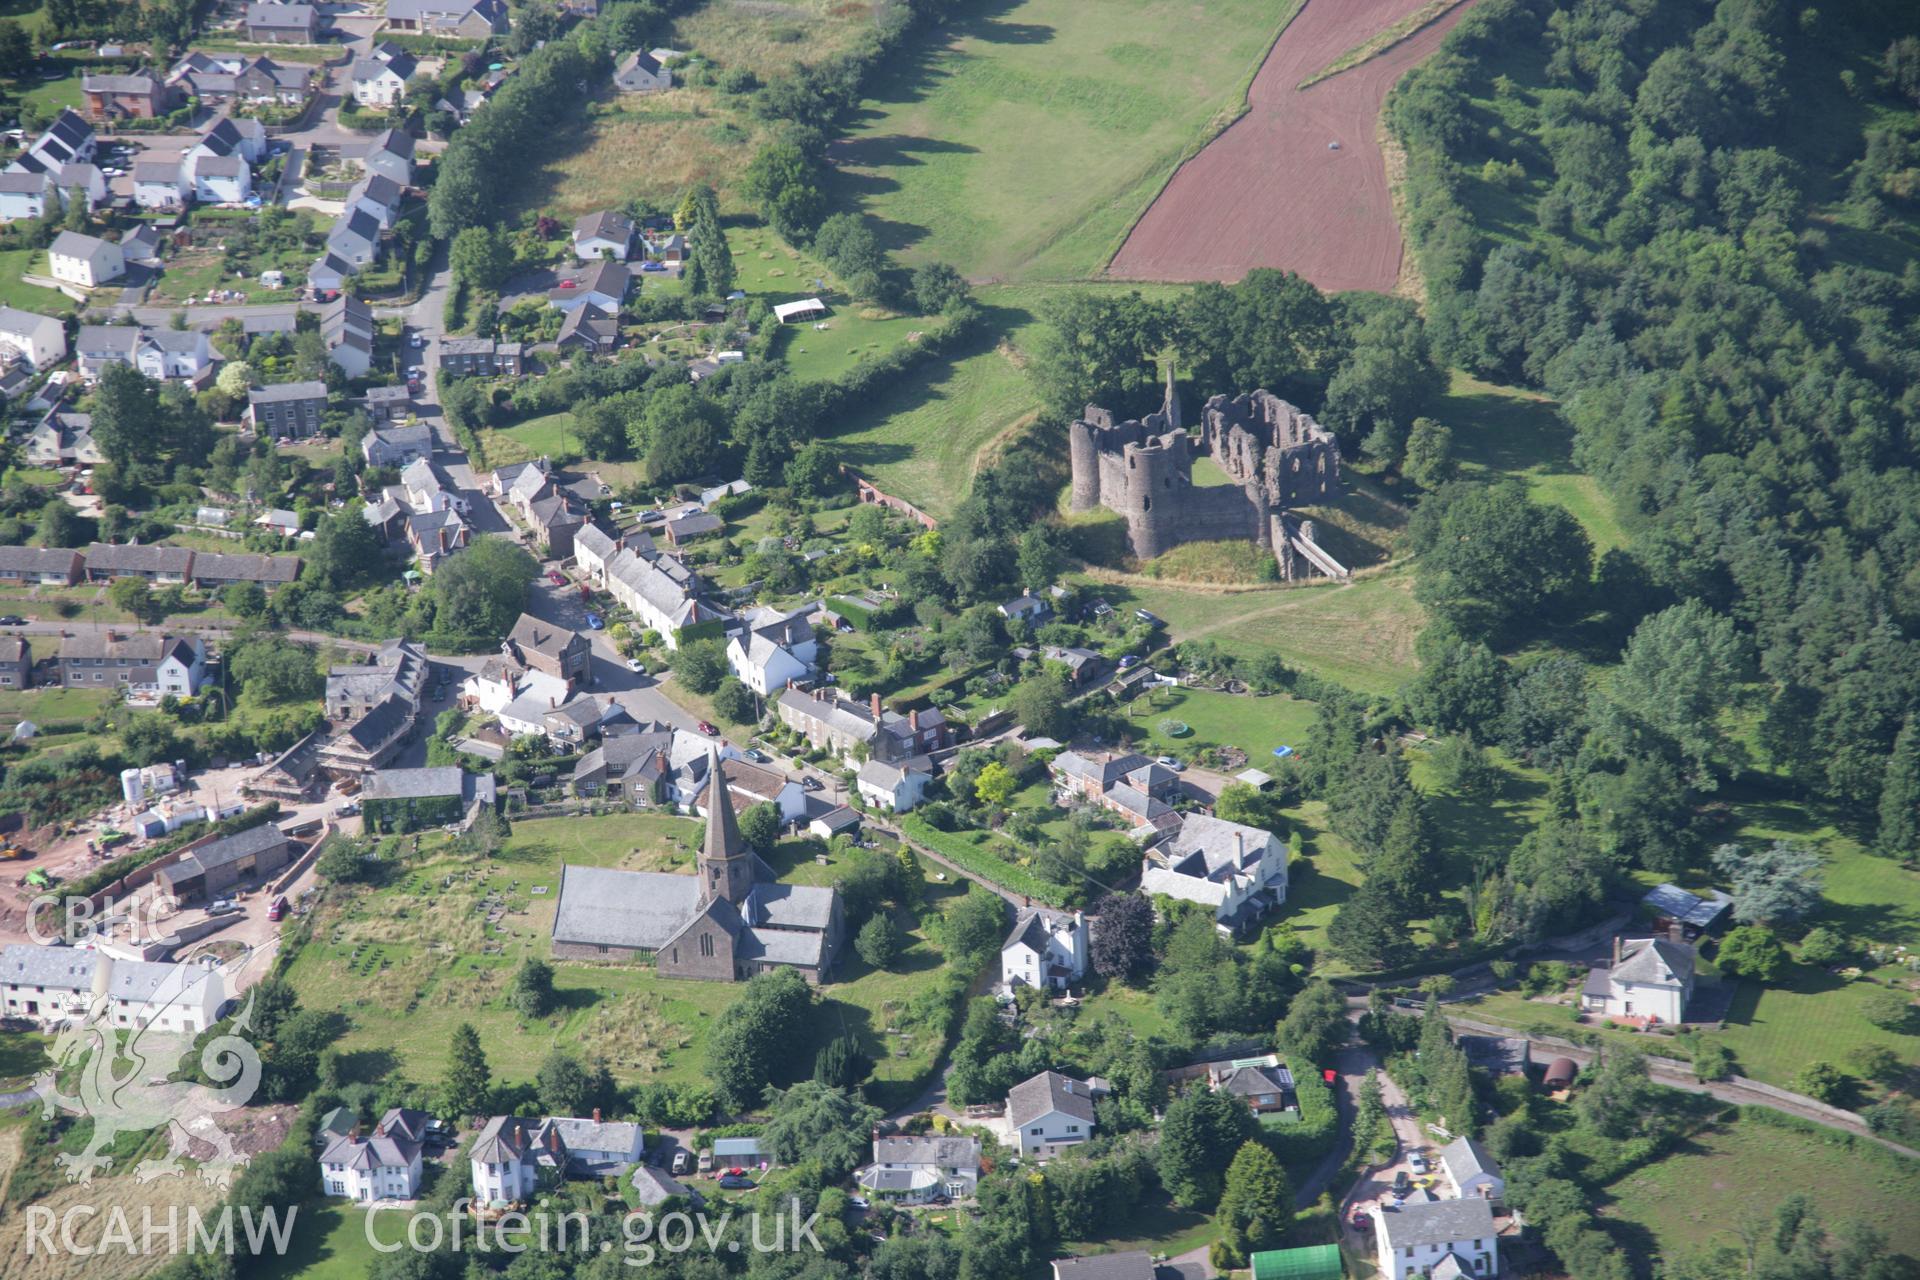 RCAHMW colour oblique aerial photograph of Grosmont Castle. Taken on 13 July 2006 by Toby Driver.